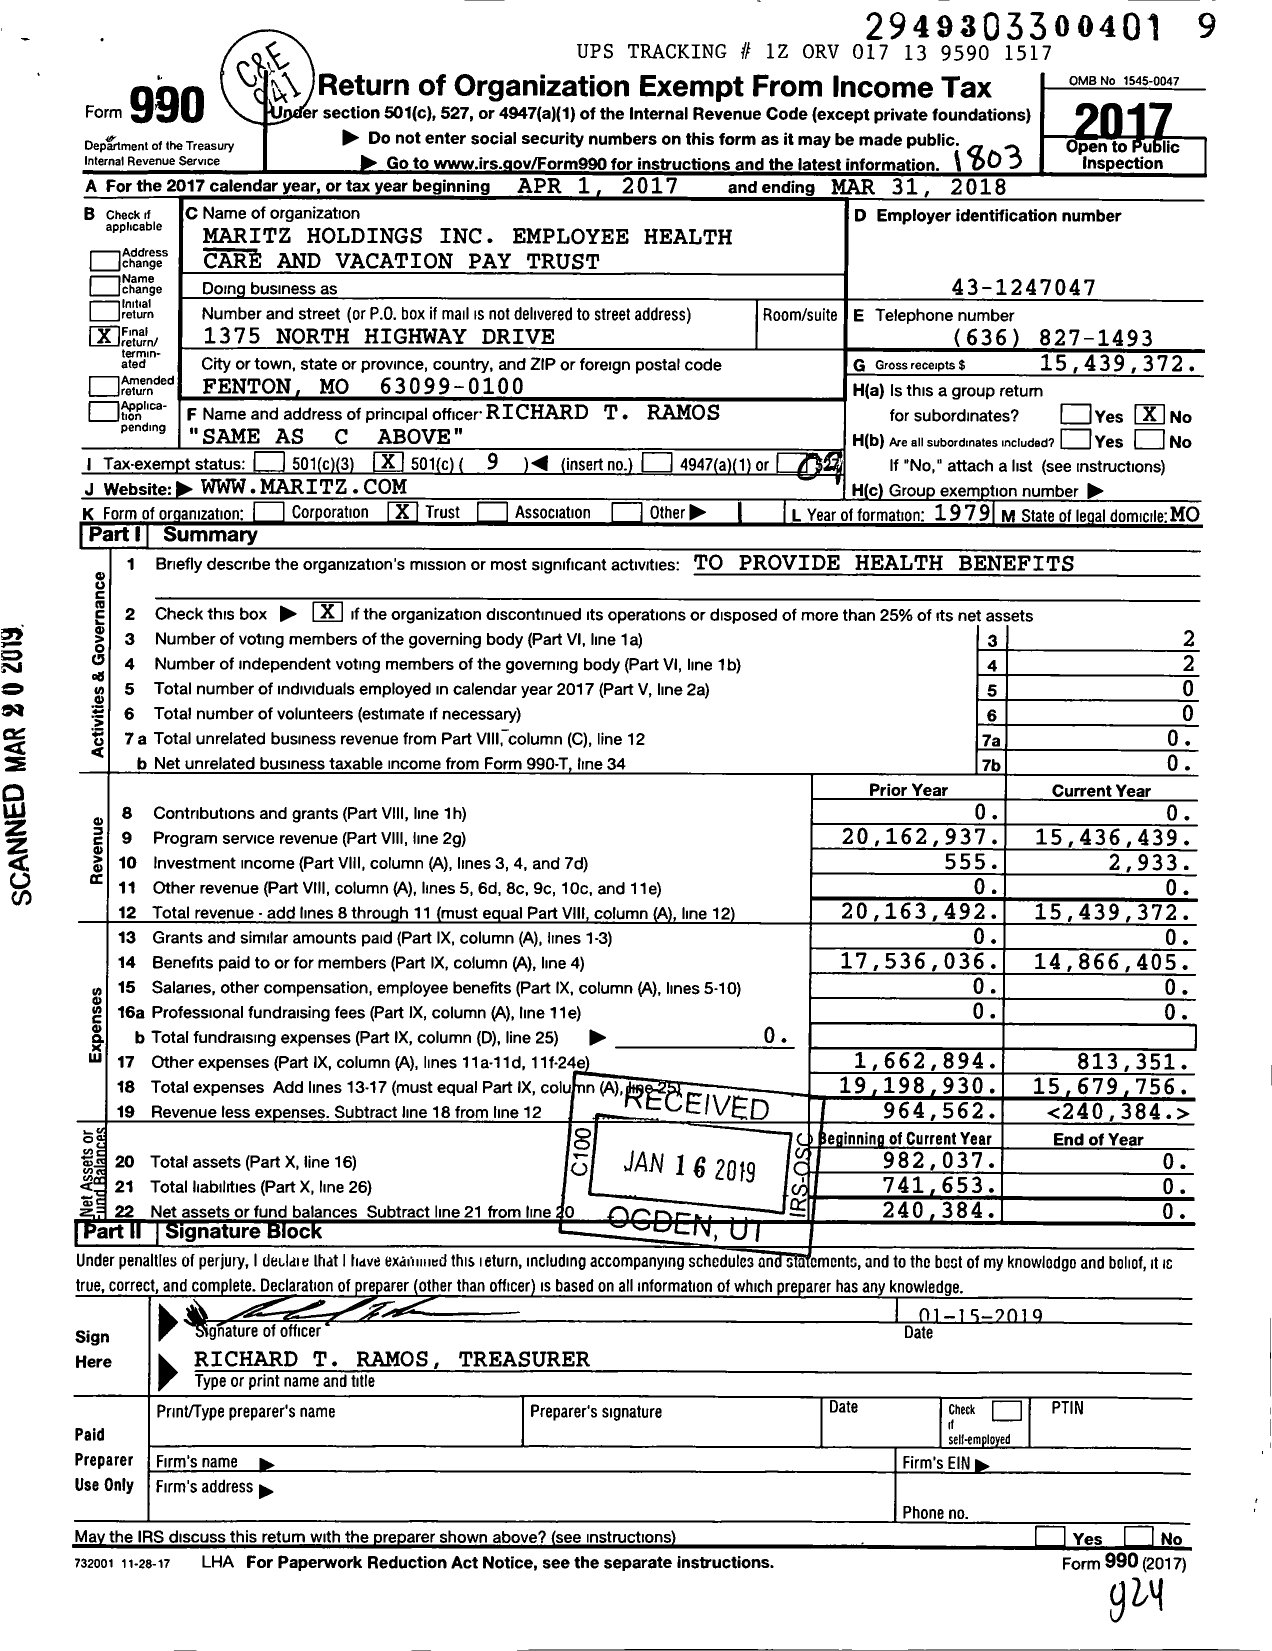 Image of first page of 2017 Form 990O for Maritz Holdings Employee Health Care and Vacation Pay Trust